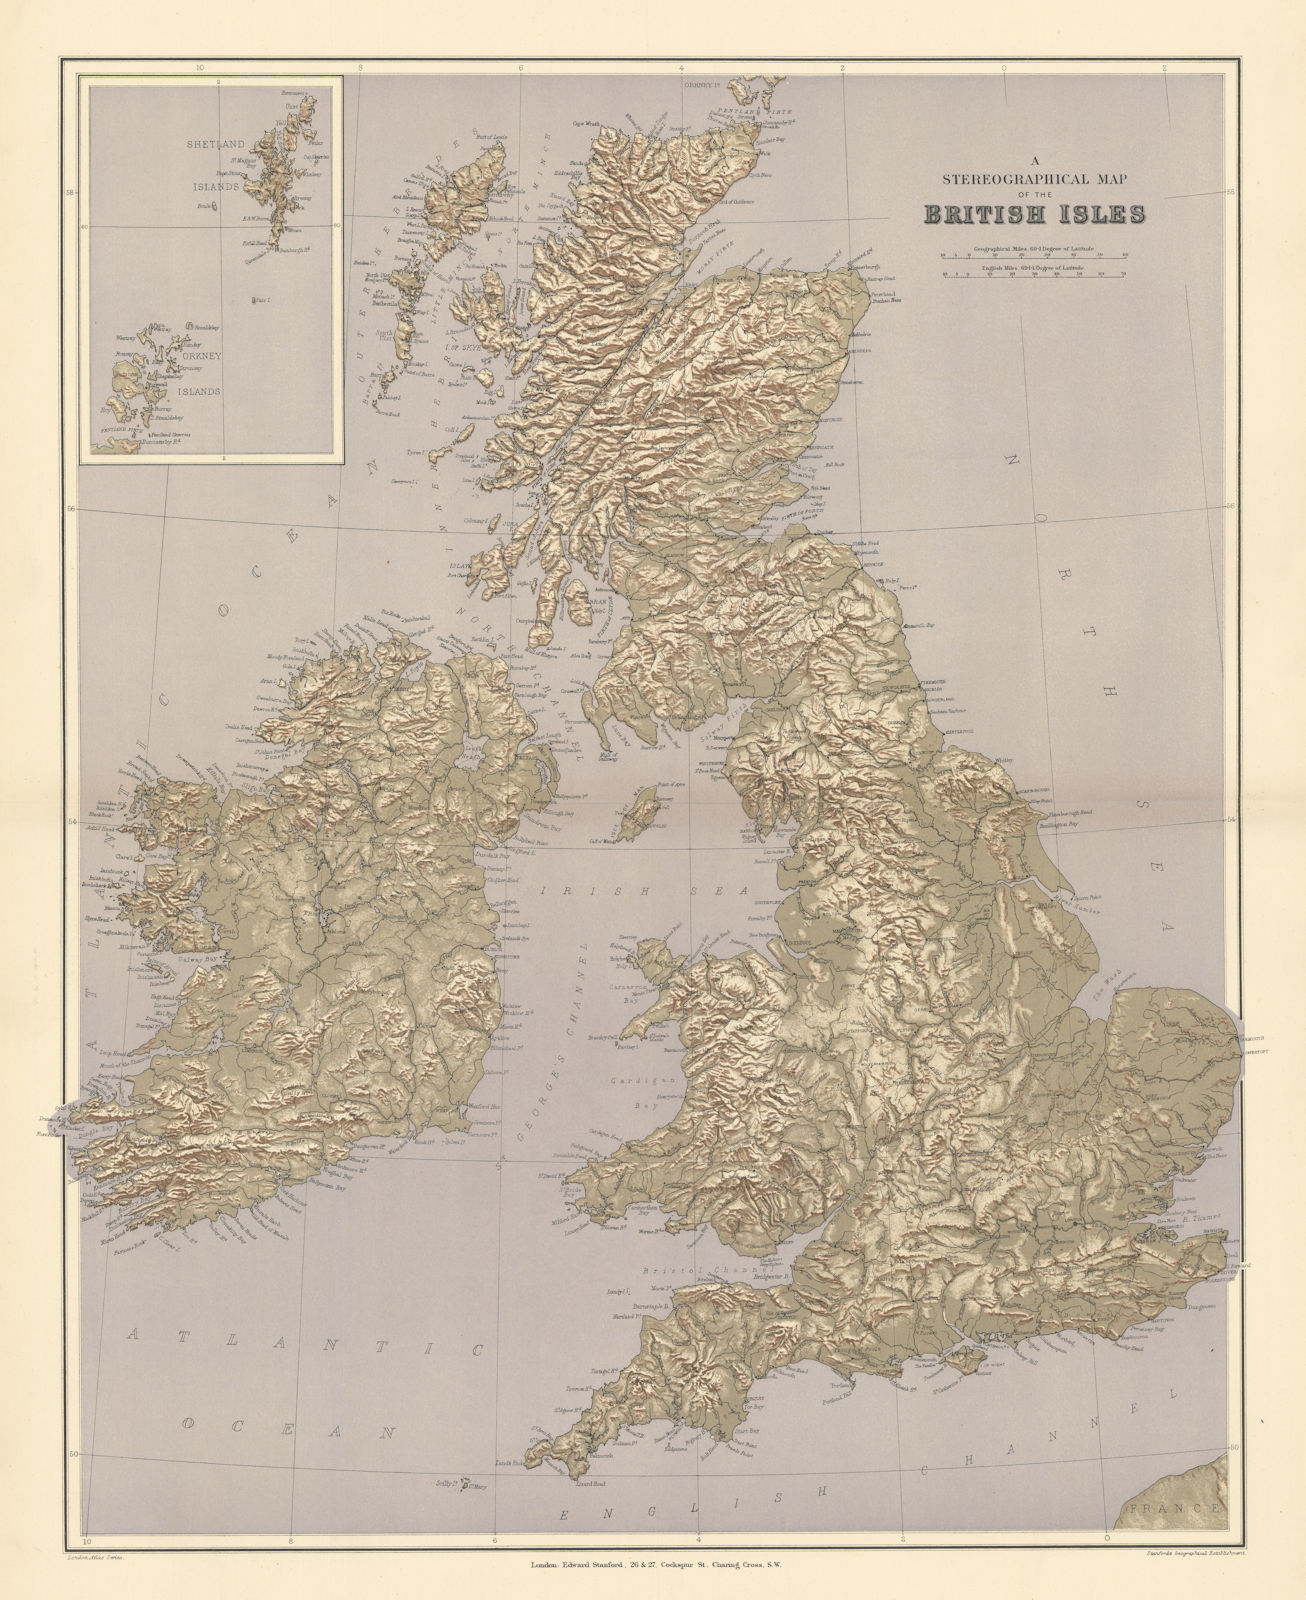 British Isles Stereographical. Mountains rivers. Large 65x52cm STANFORD 1896 map